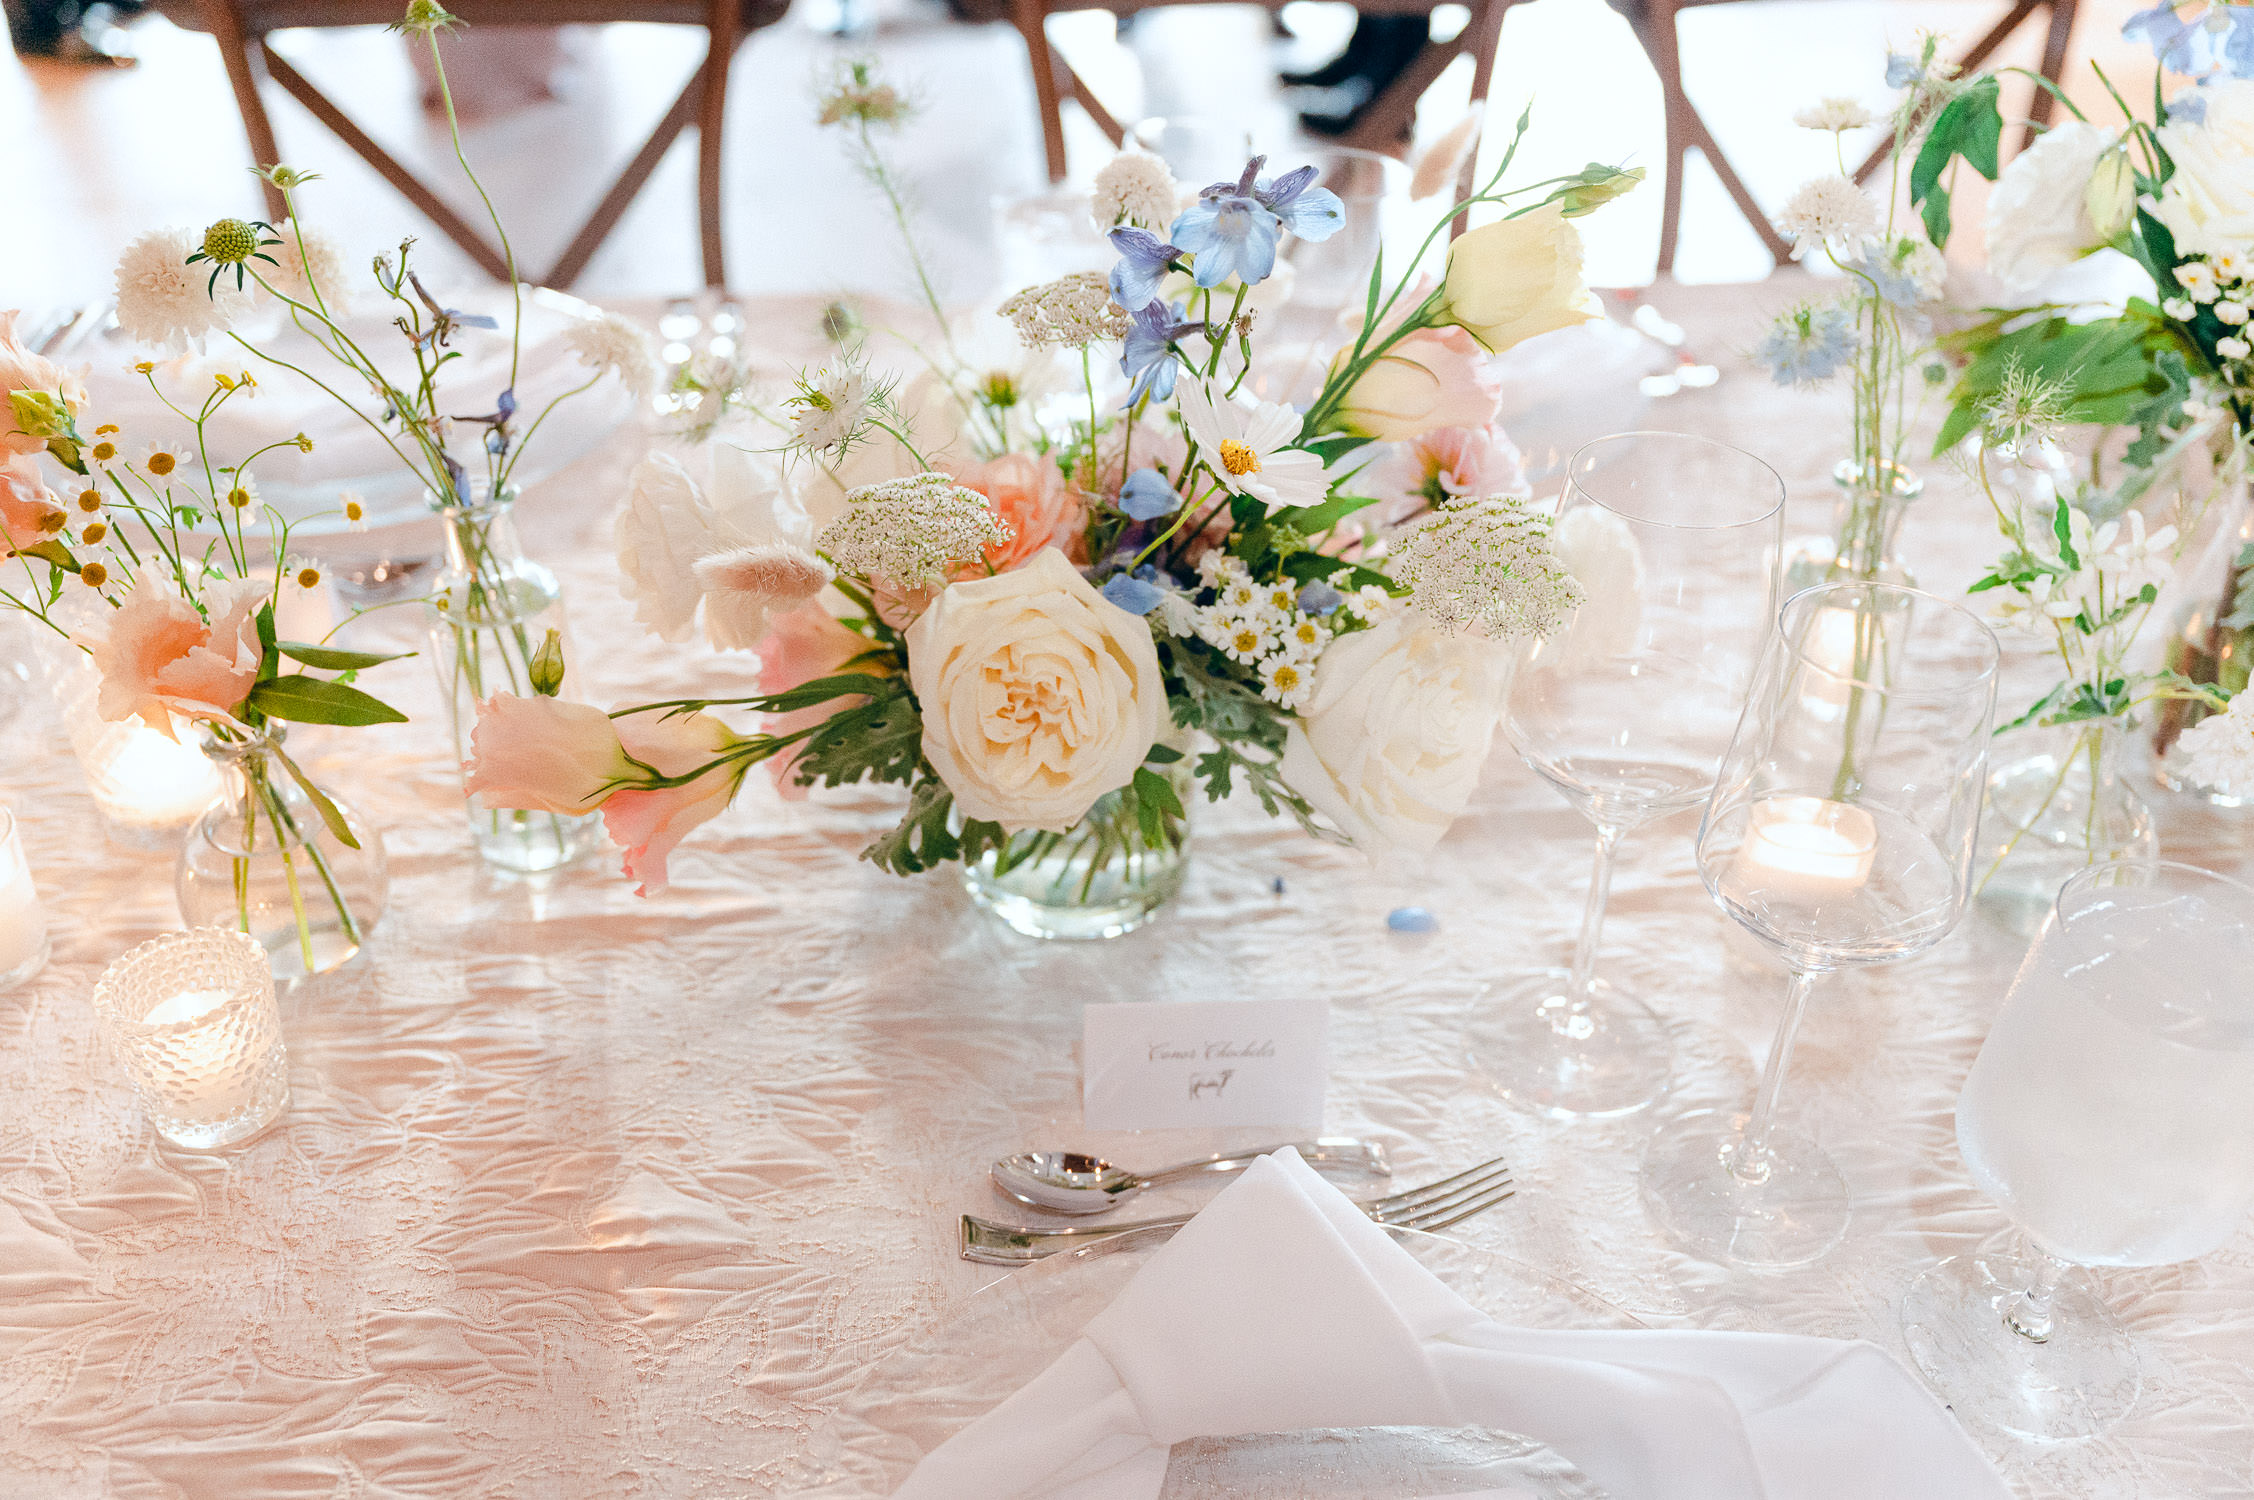 White, blue and pink centerpiece of a wedding table.